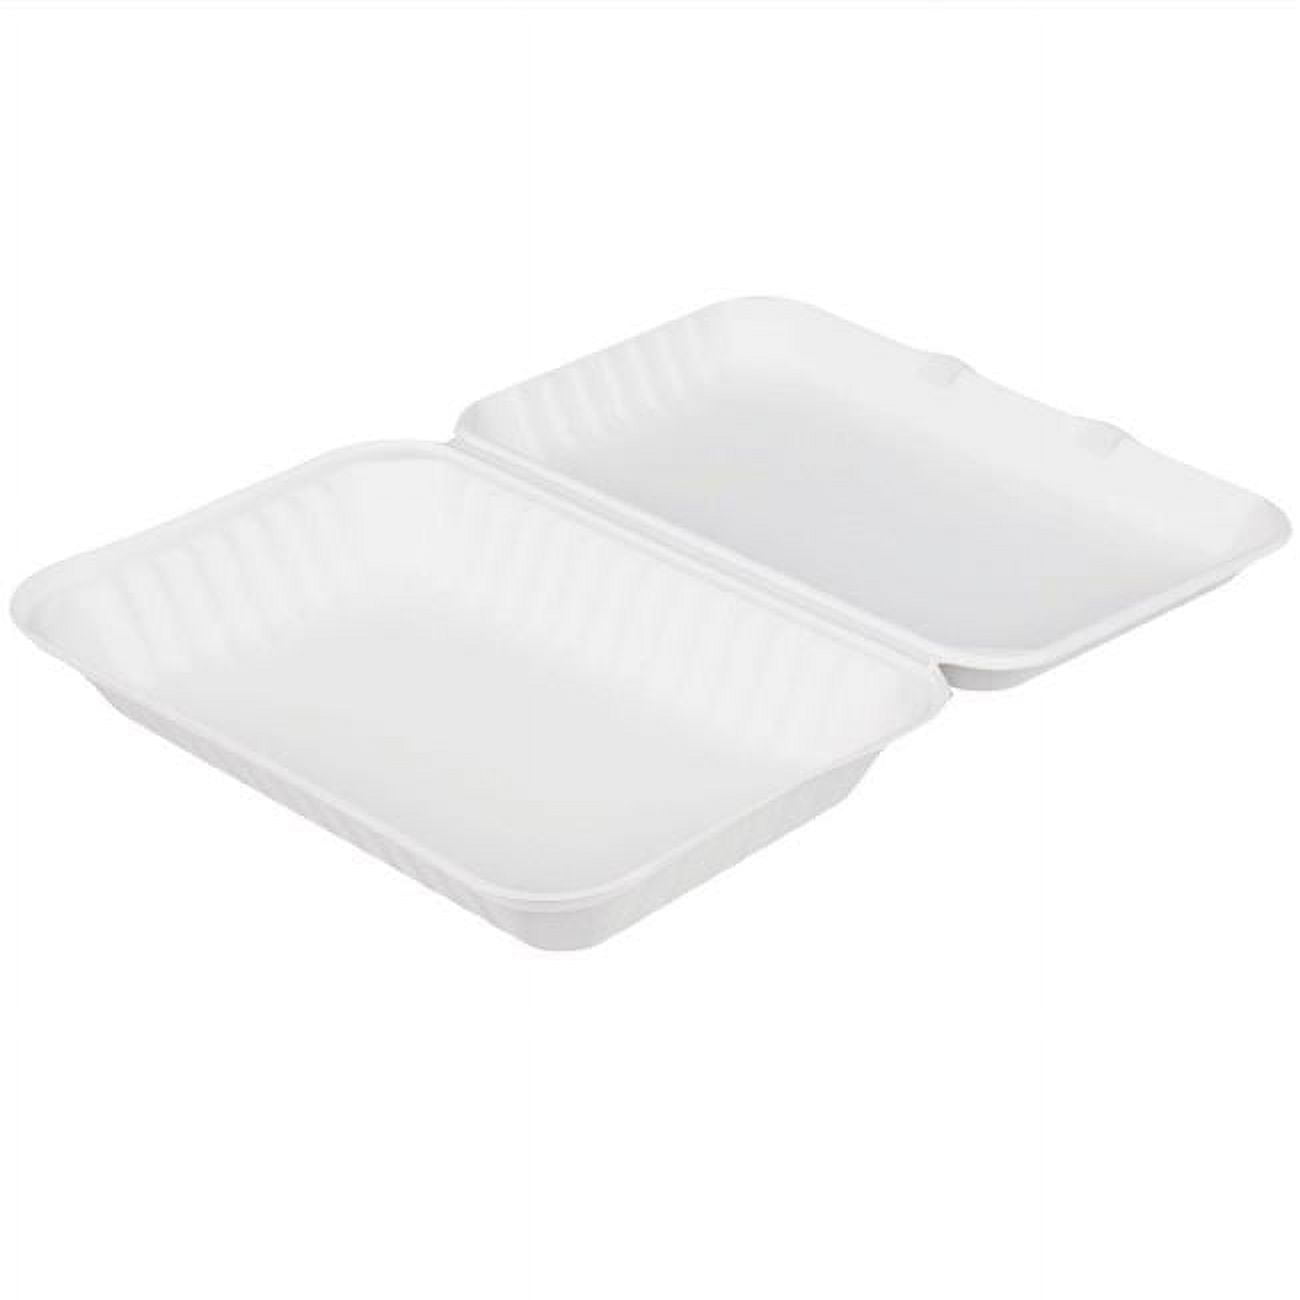 Tw-boo-011 Pec 9 X 9 X 3 In. Bagasse Evolution Hinged Container - Case Of 300